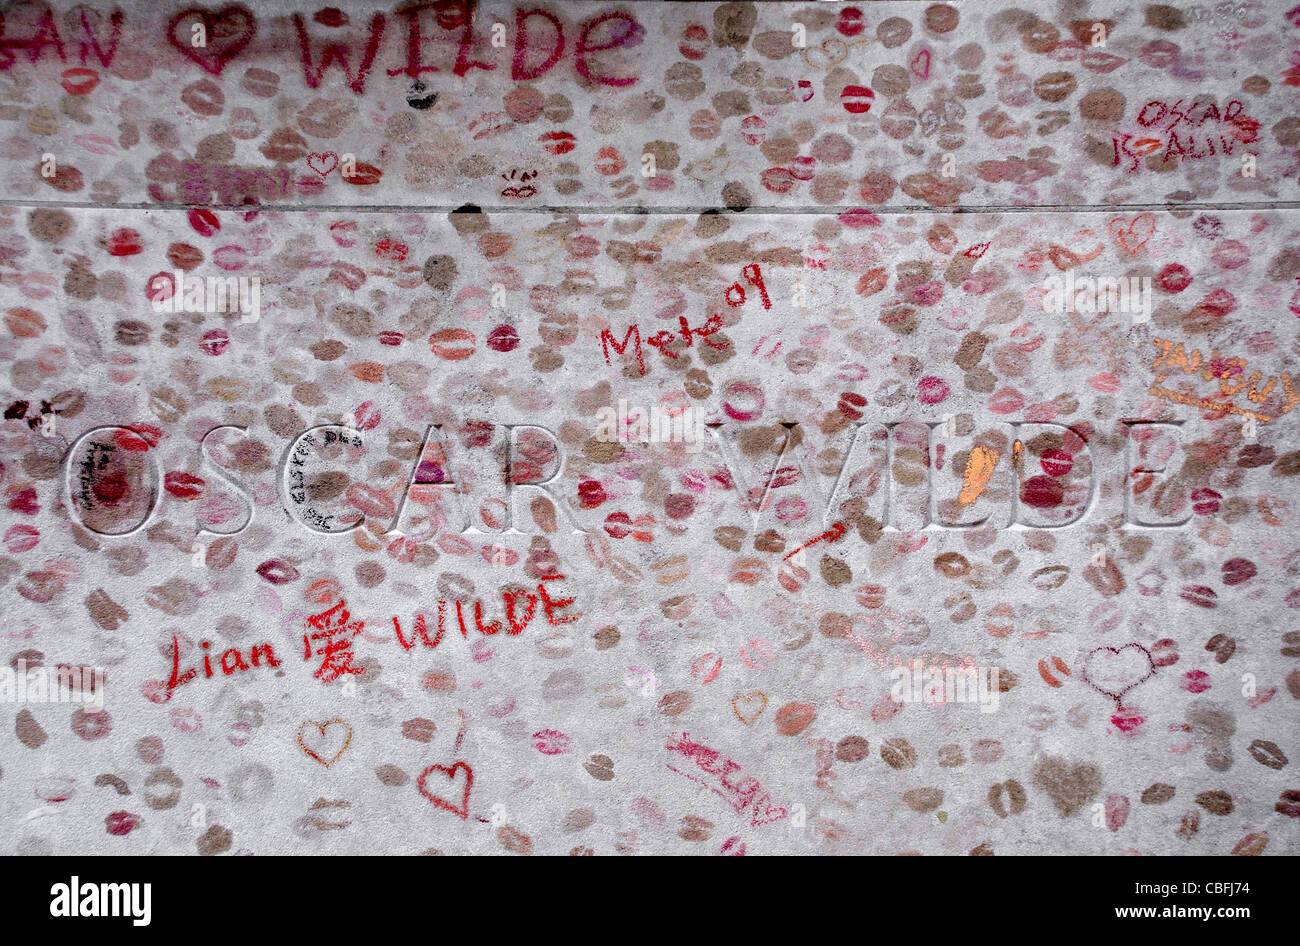 Close up of Oscar Wilde's name on grave stone covered in lipstick kisses Stock Photo